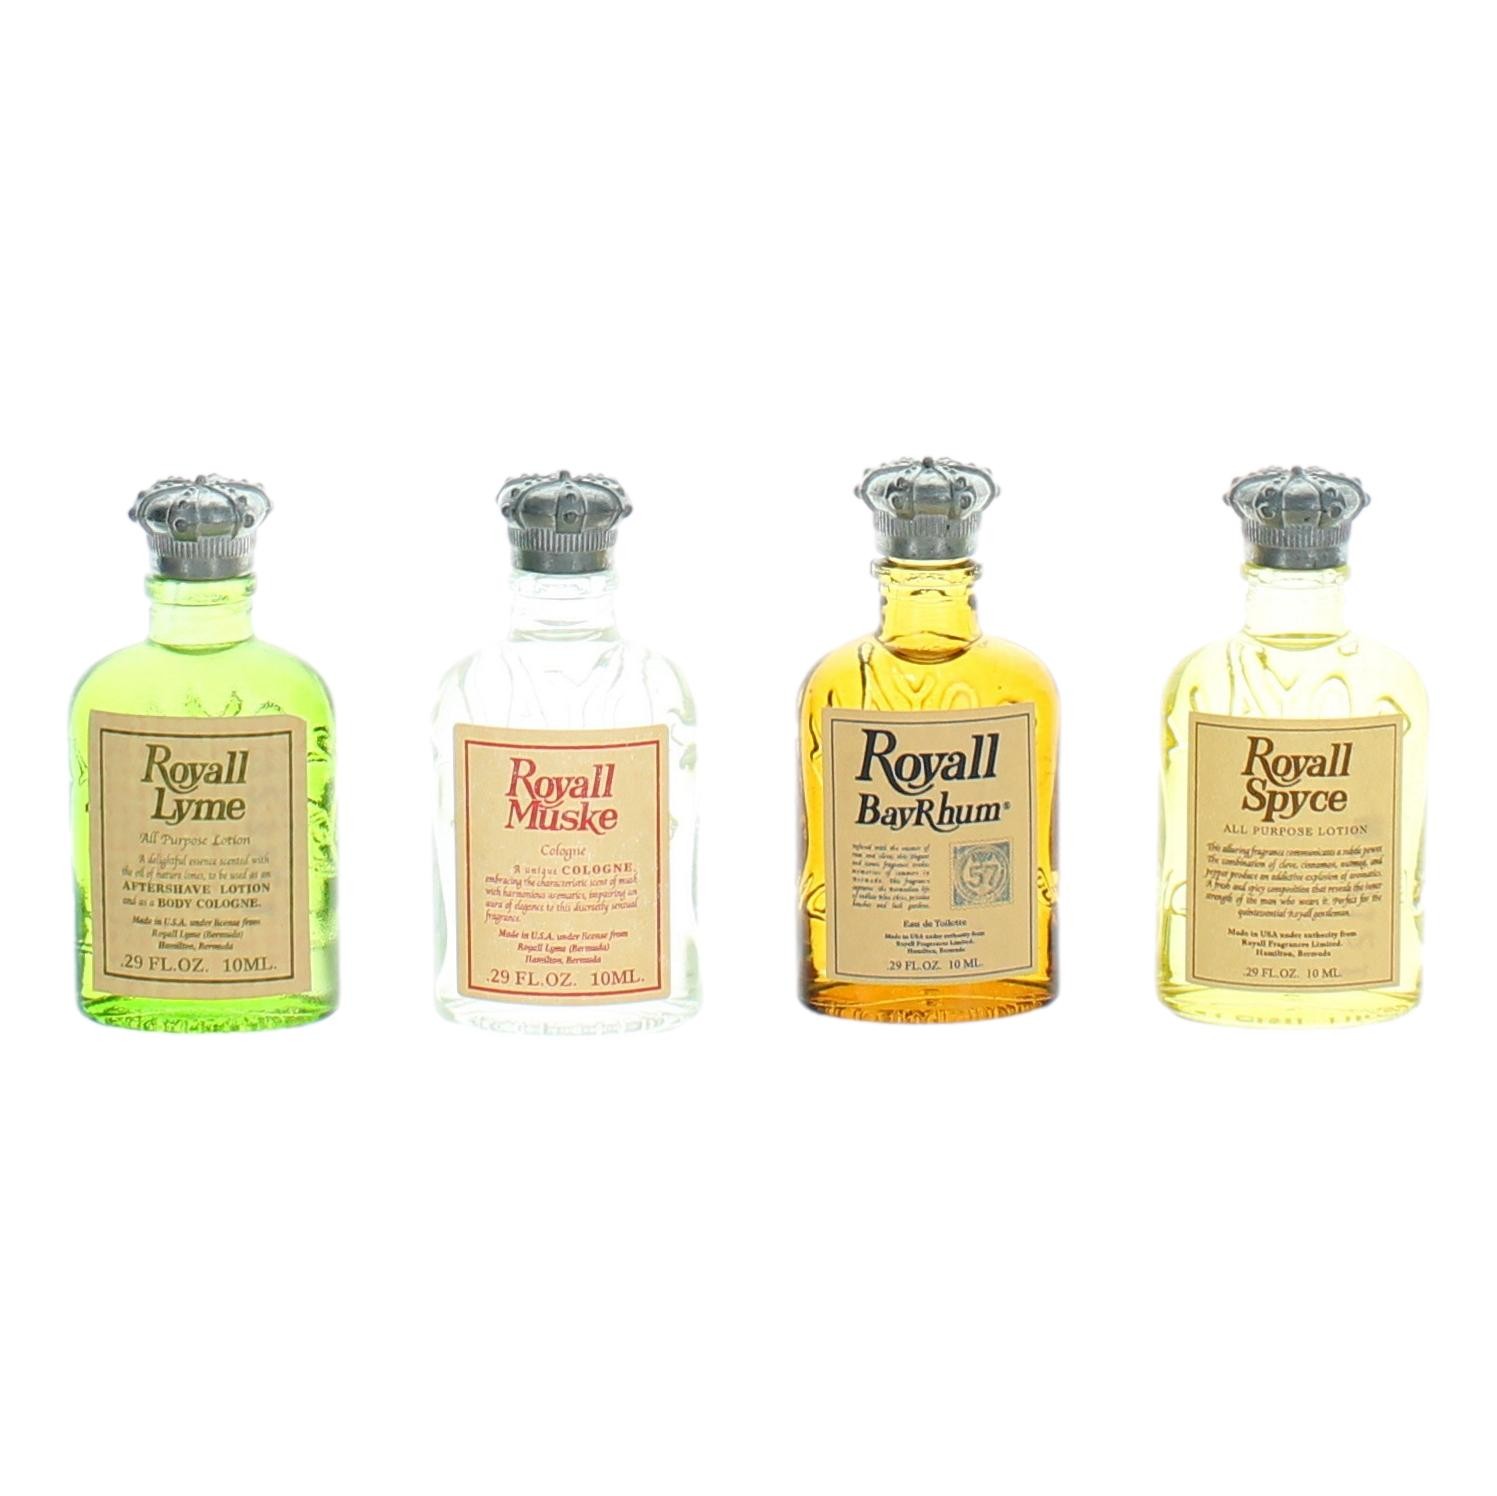 Royall Fragrances The Heritage Collection by Royall Fragrances, 4 Piece Mini Set for Men